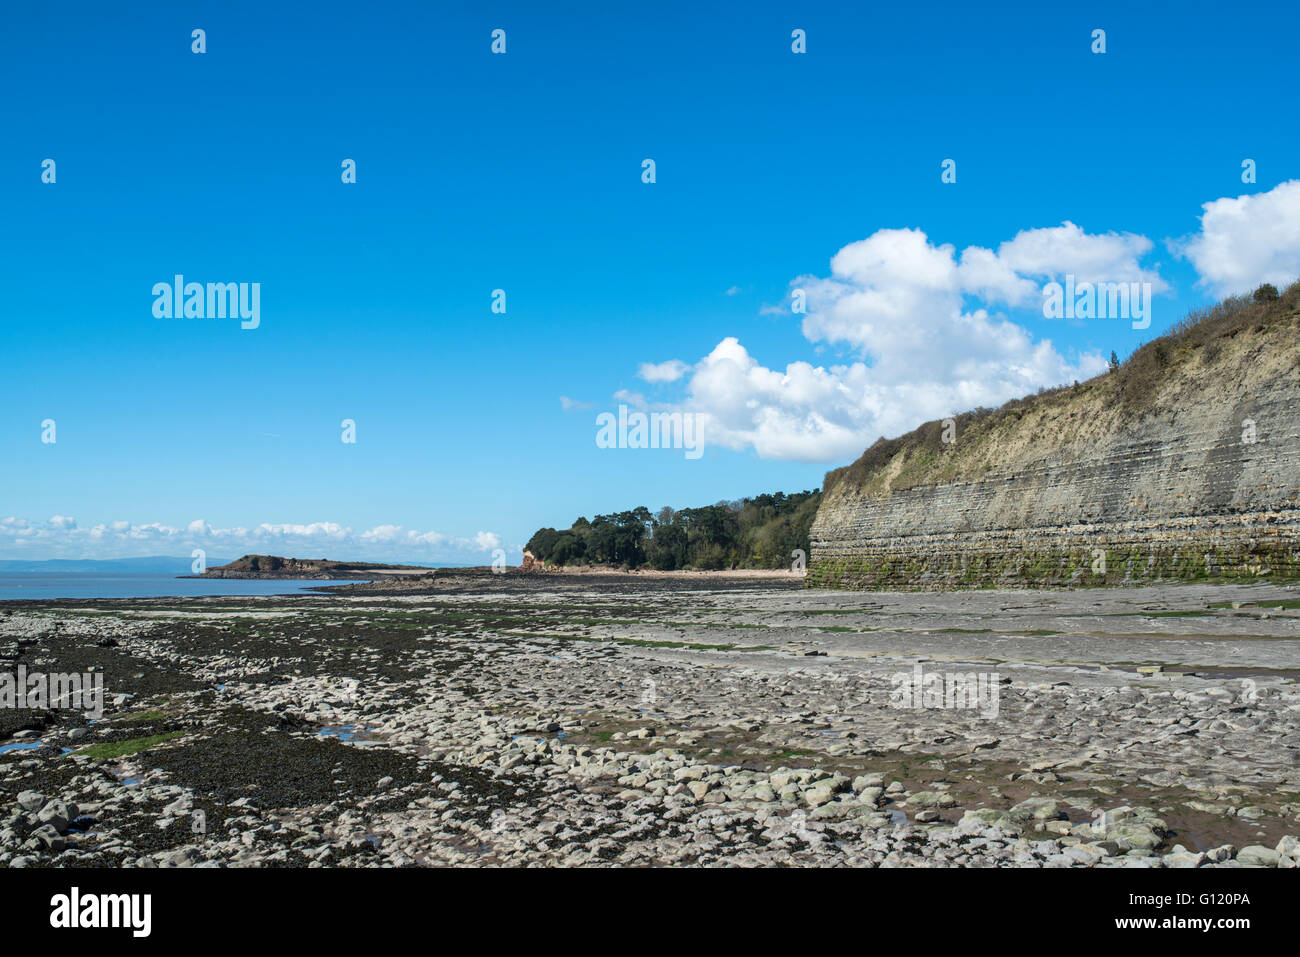 Seaweed on a pebble beach, below cliffs, with a tidal island in the bay. Stock Photo